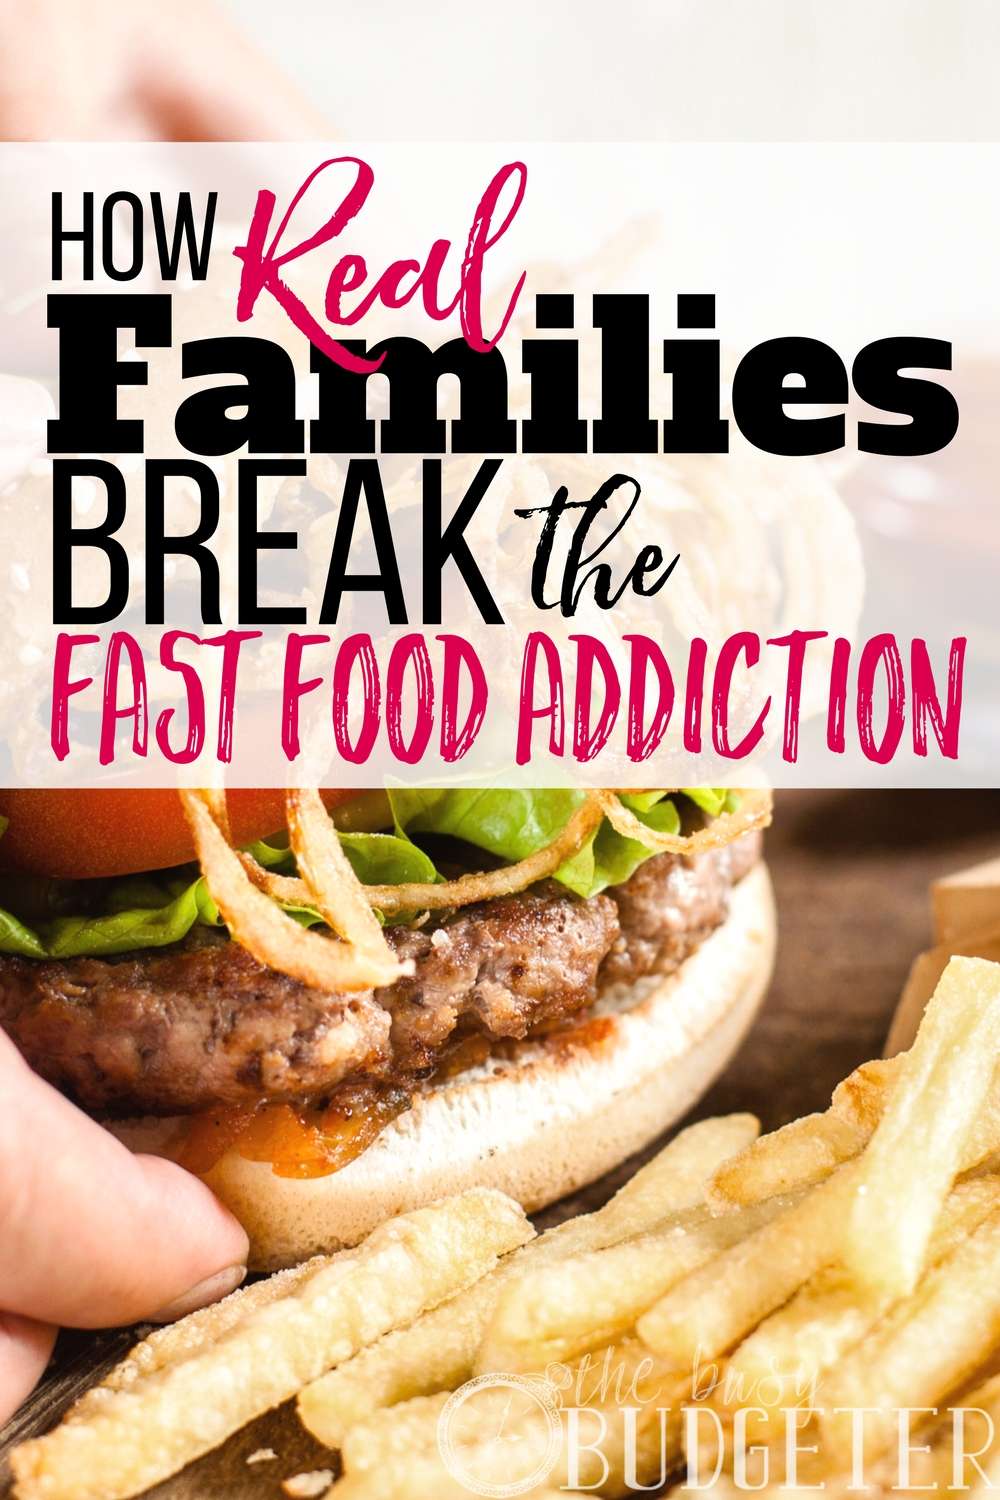 How Real Families Break the Fast Food Addiction